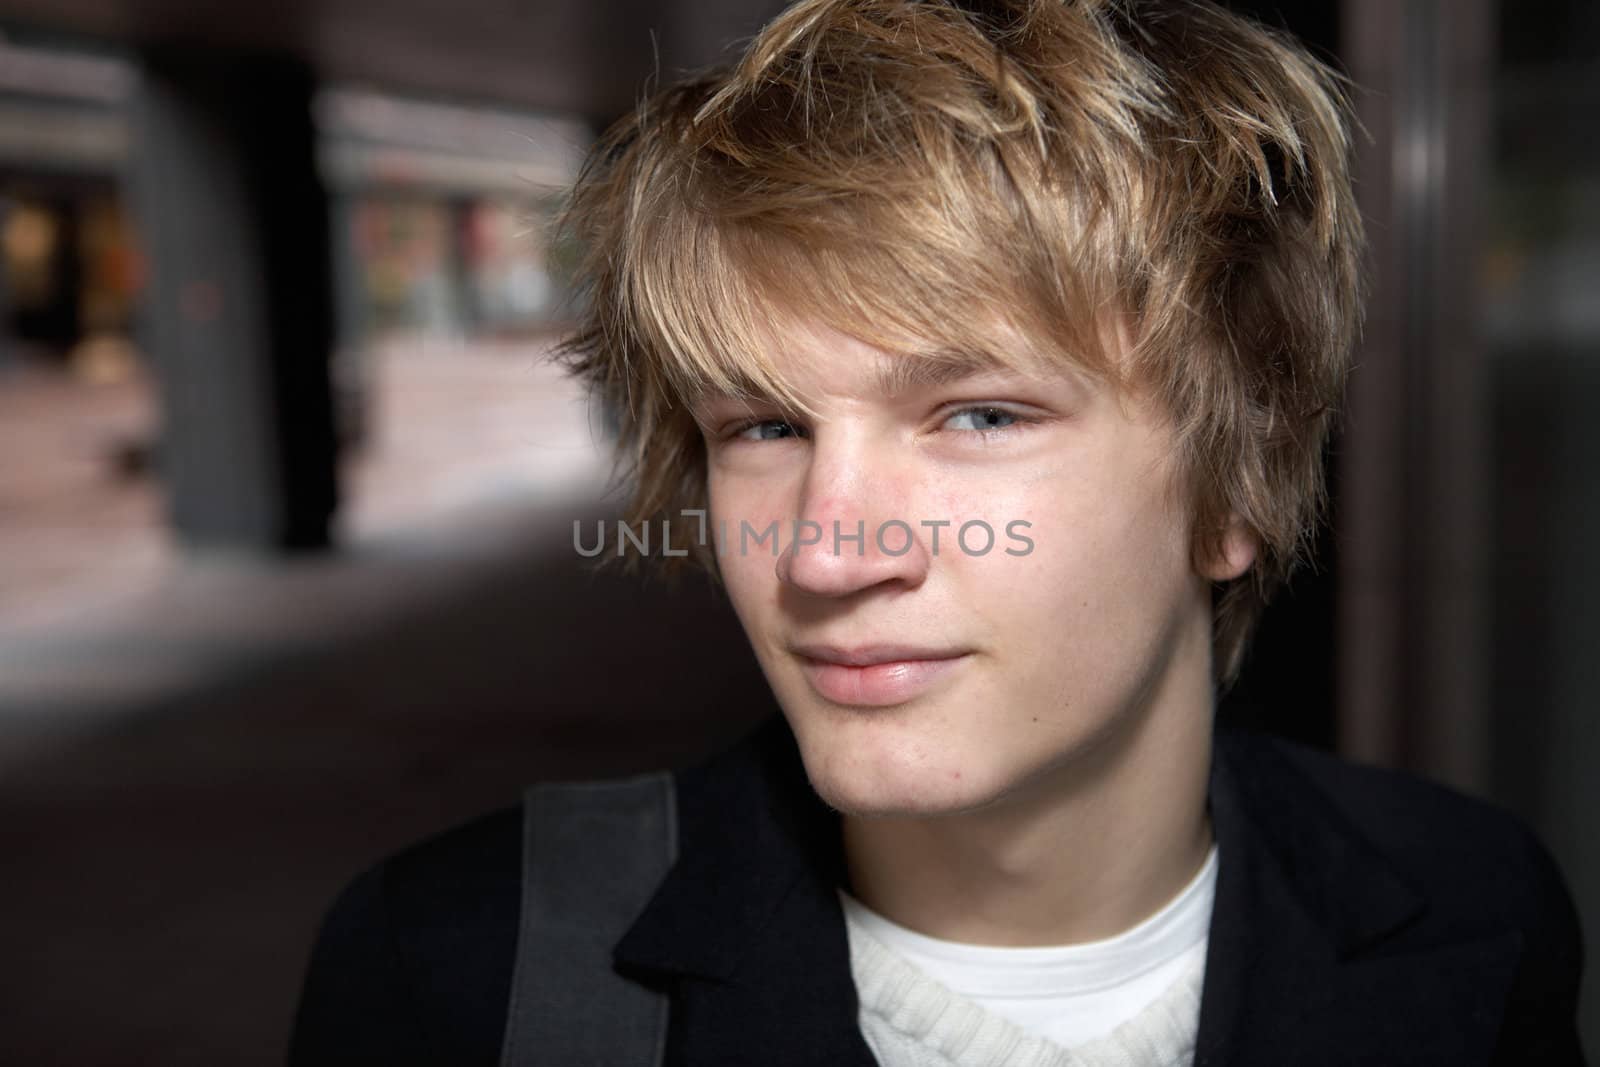 Portrait of teenage boy smiling in city street, looking at camera